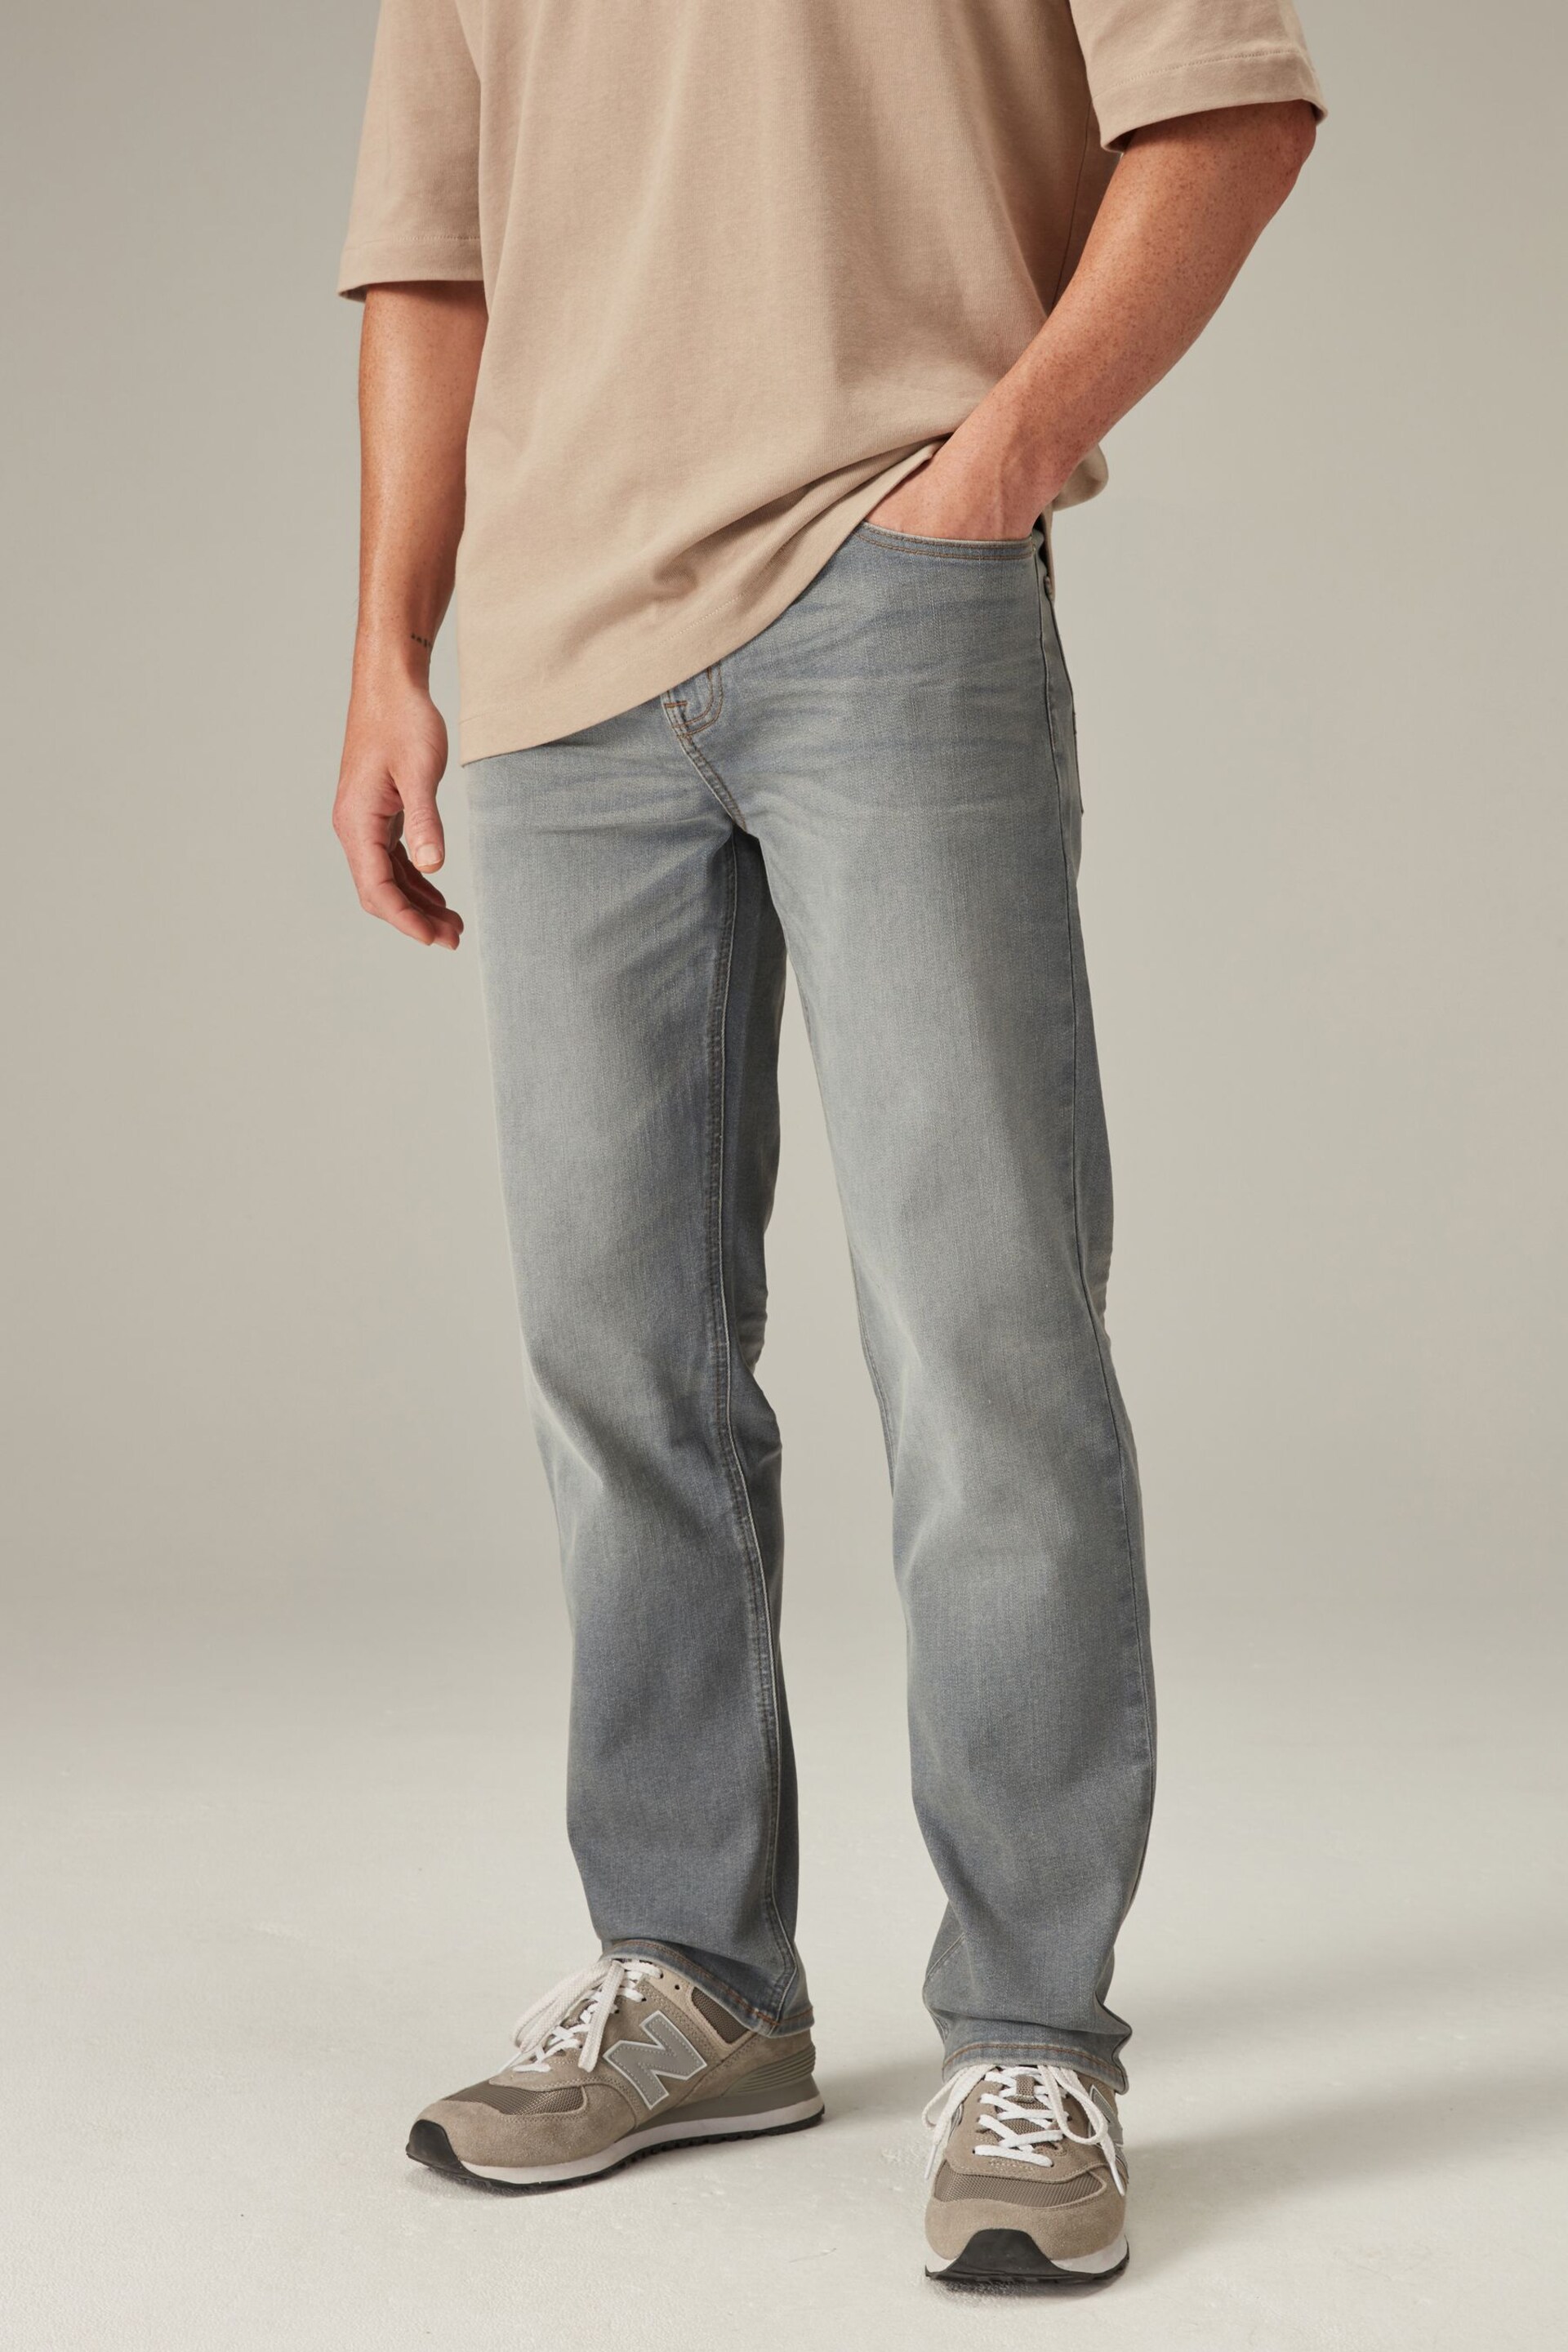 Light Grey Straight Fit Motion Flex Jeans - Image 1 of 12